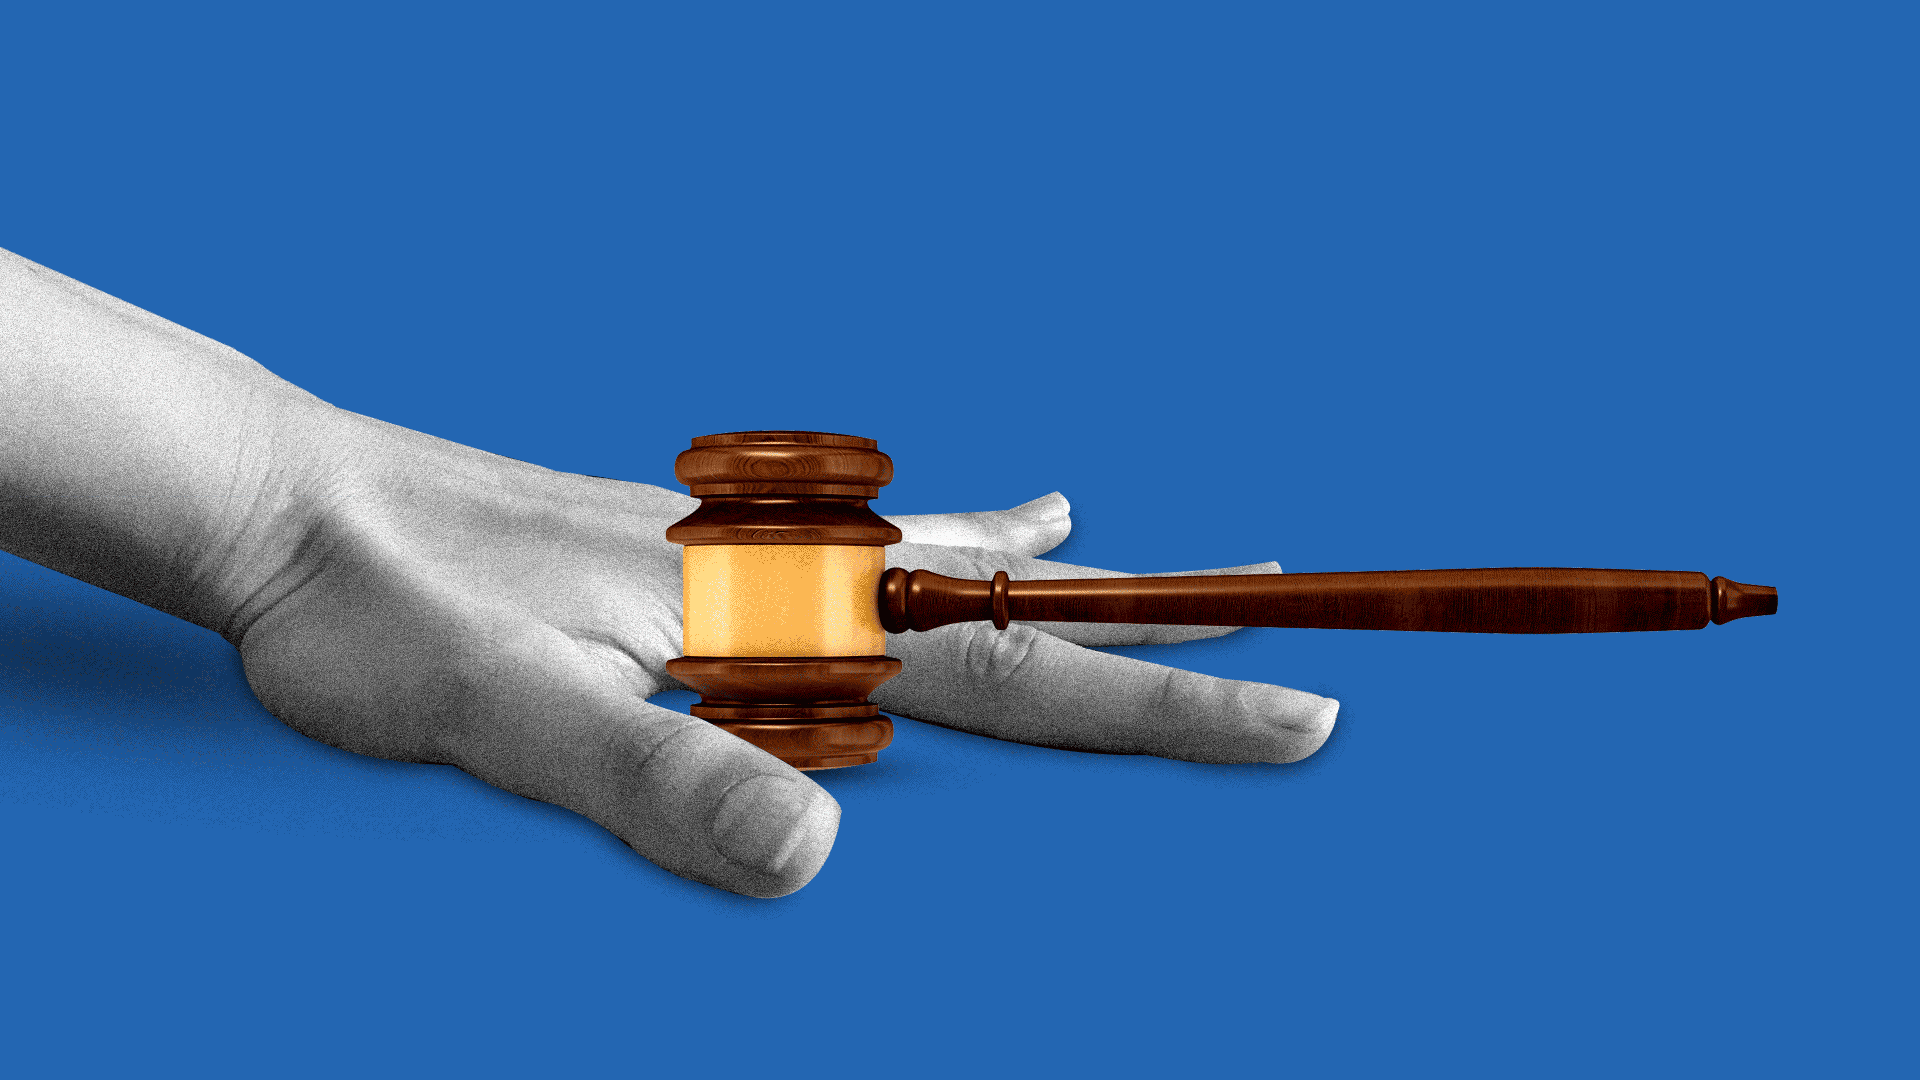 A gif illustration of a gavel hitting between the fingers of an open hand